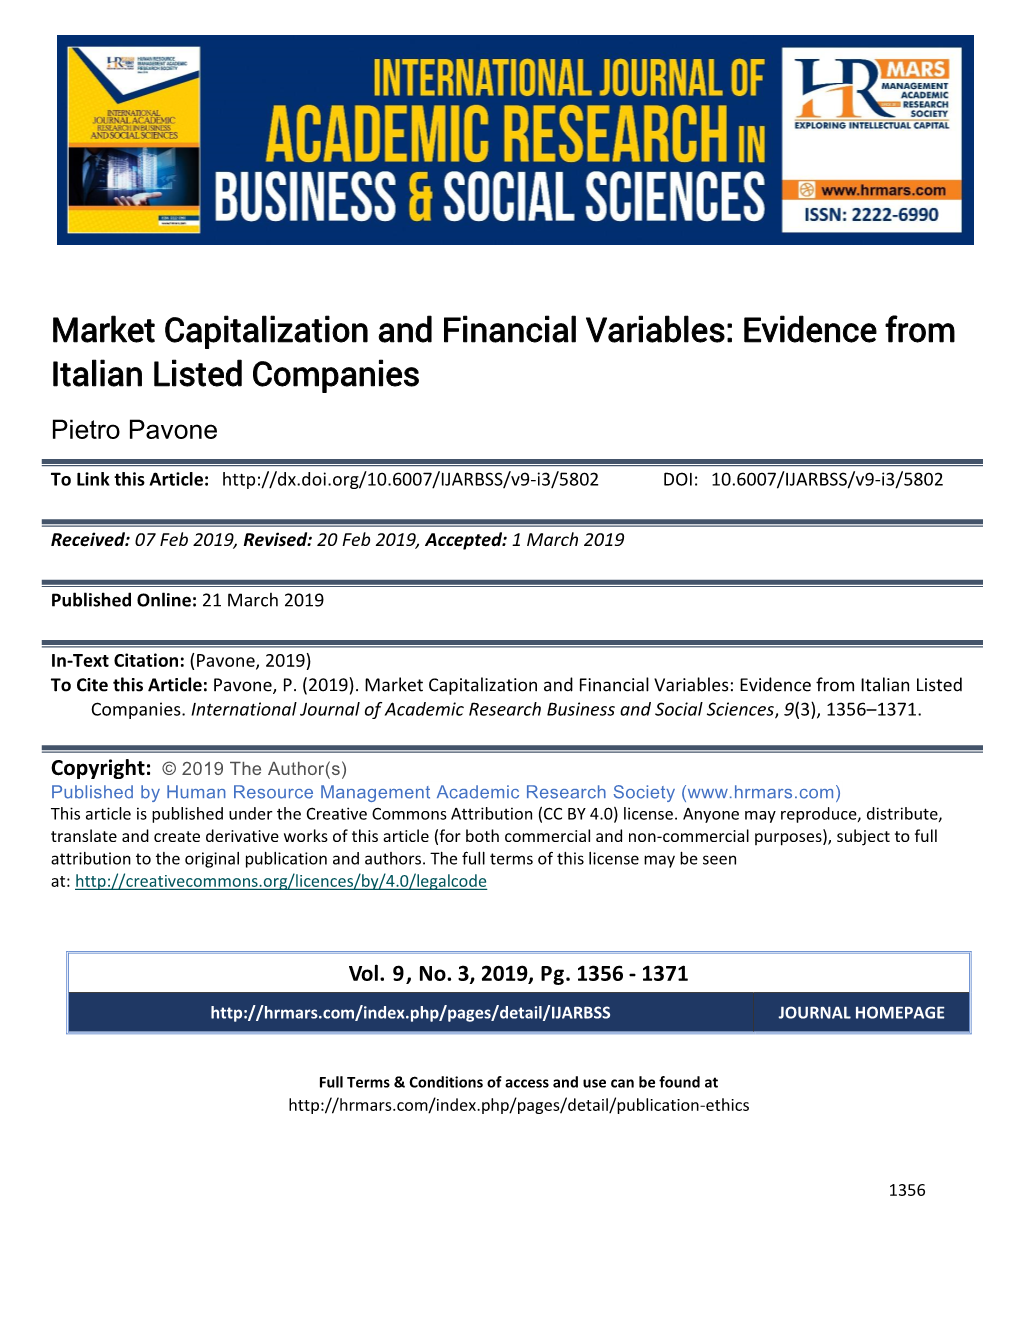 Market Capitalization and Financial Variables: Evidence from Italian Listed Companies